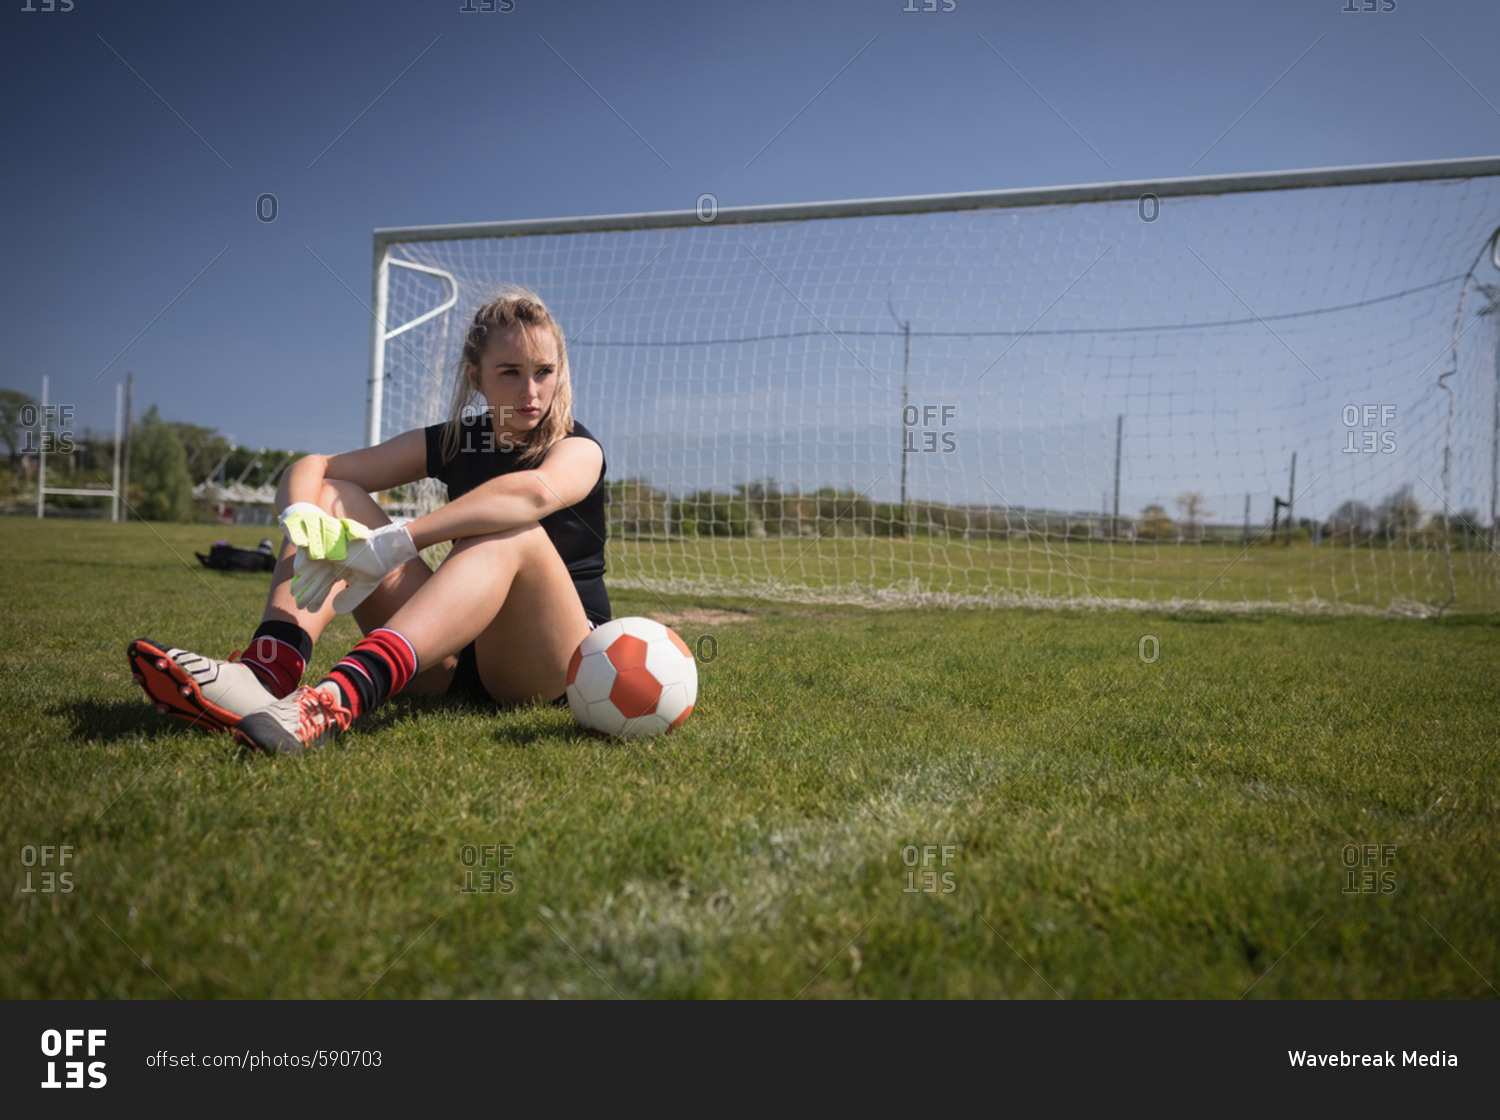 Full length of female soccer player relaxing by goal post on playing field